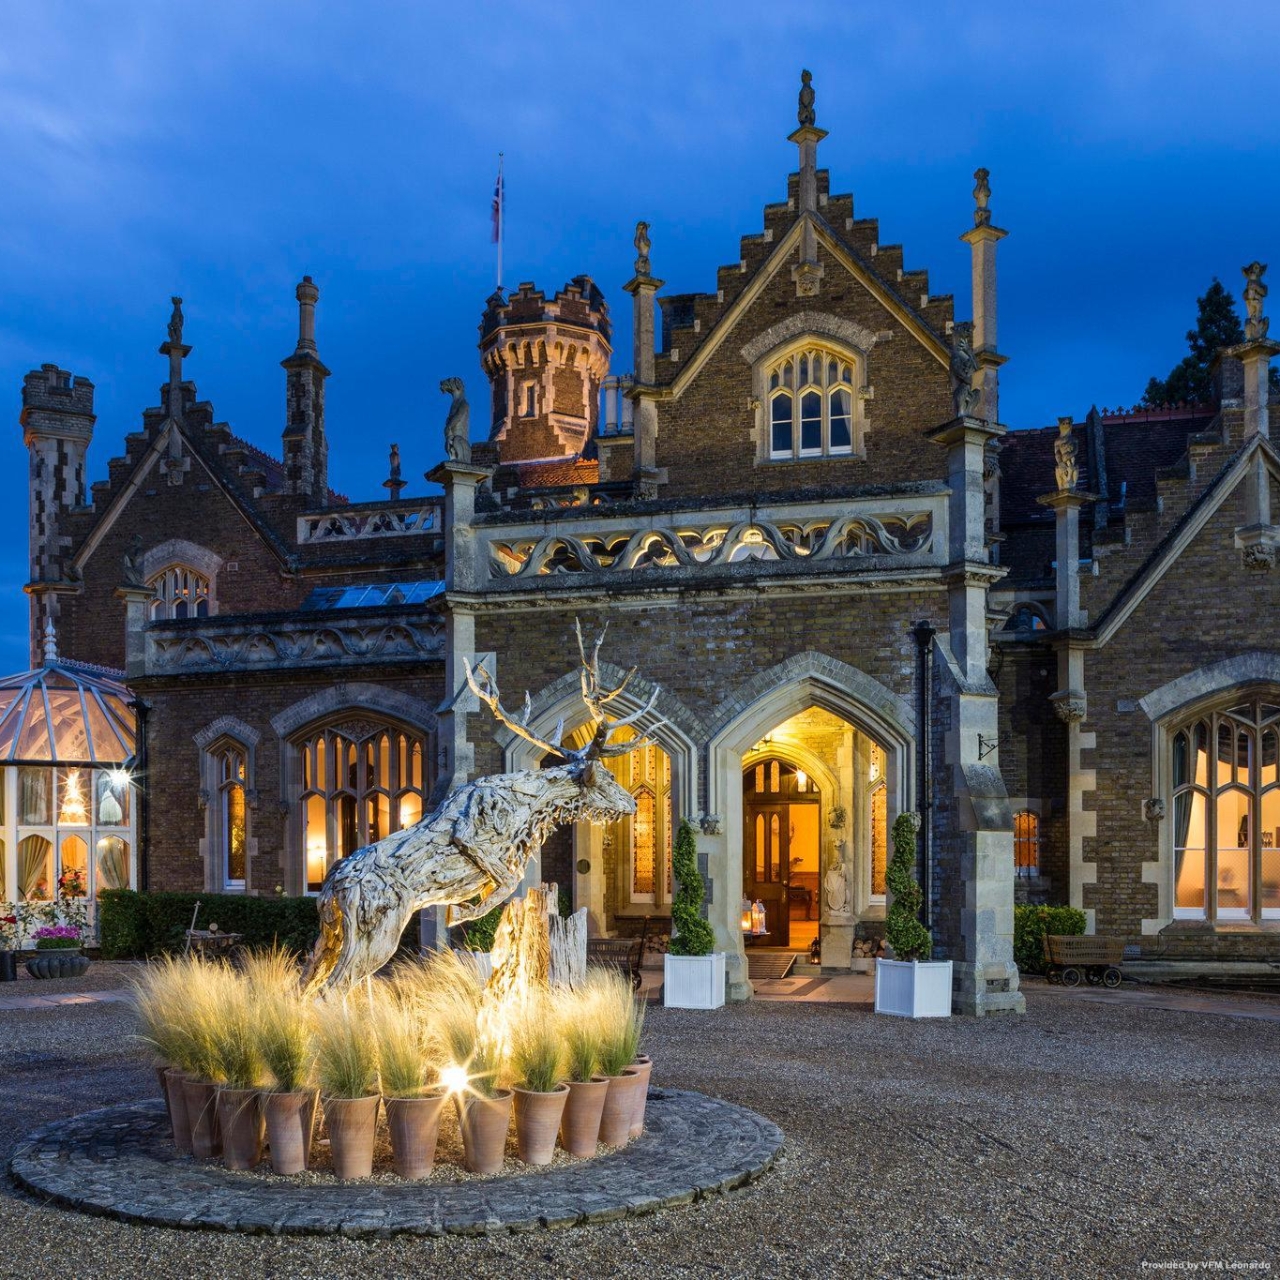 The Oakley Court Hotel - 4 HRS star hotel in Windsor, Windsor and  Maidenhead (England)